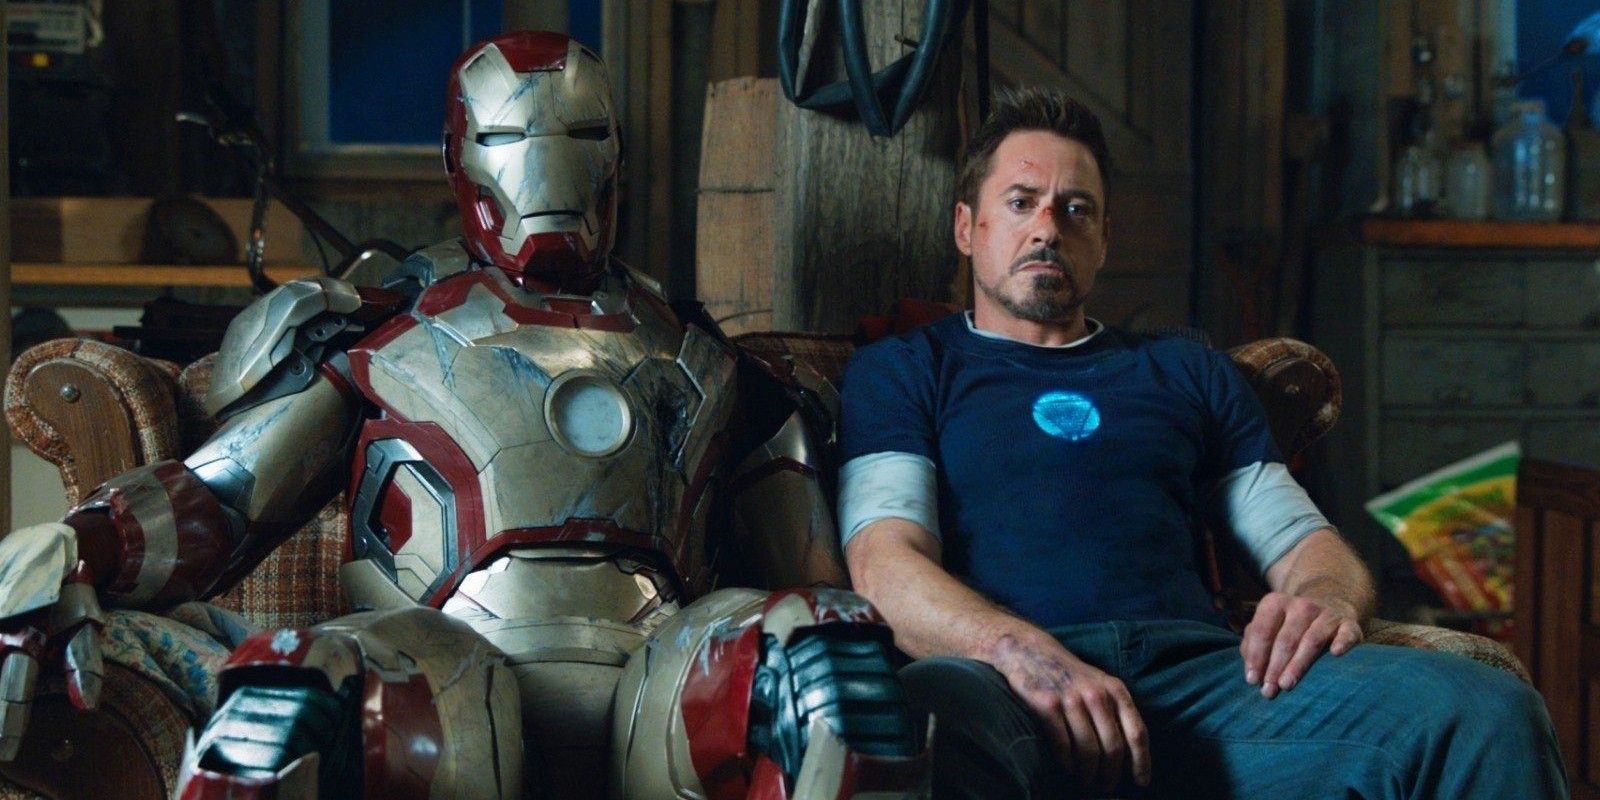 Iron Man looking defeated